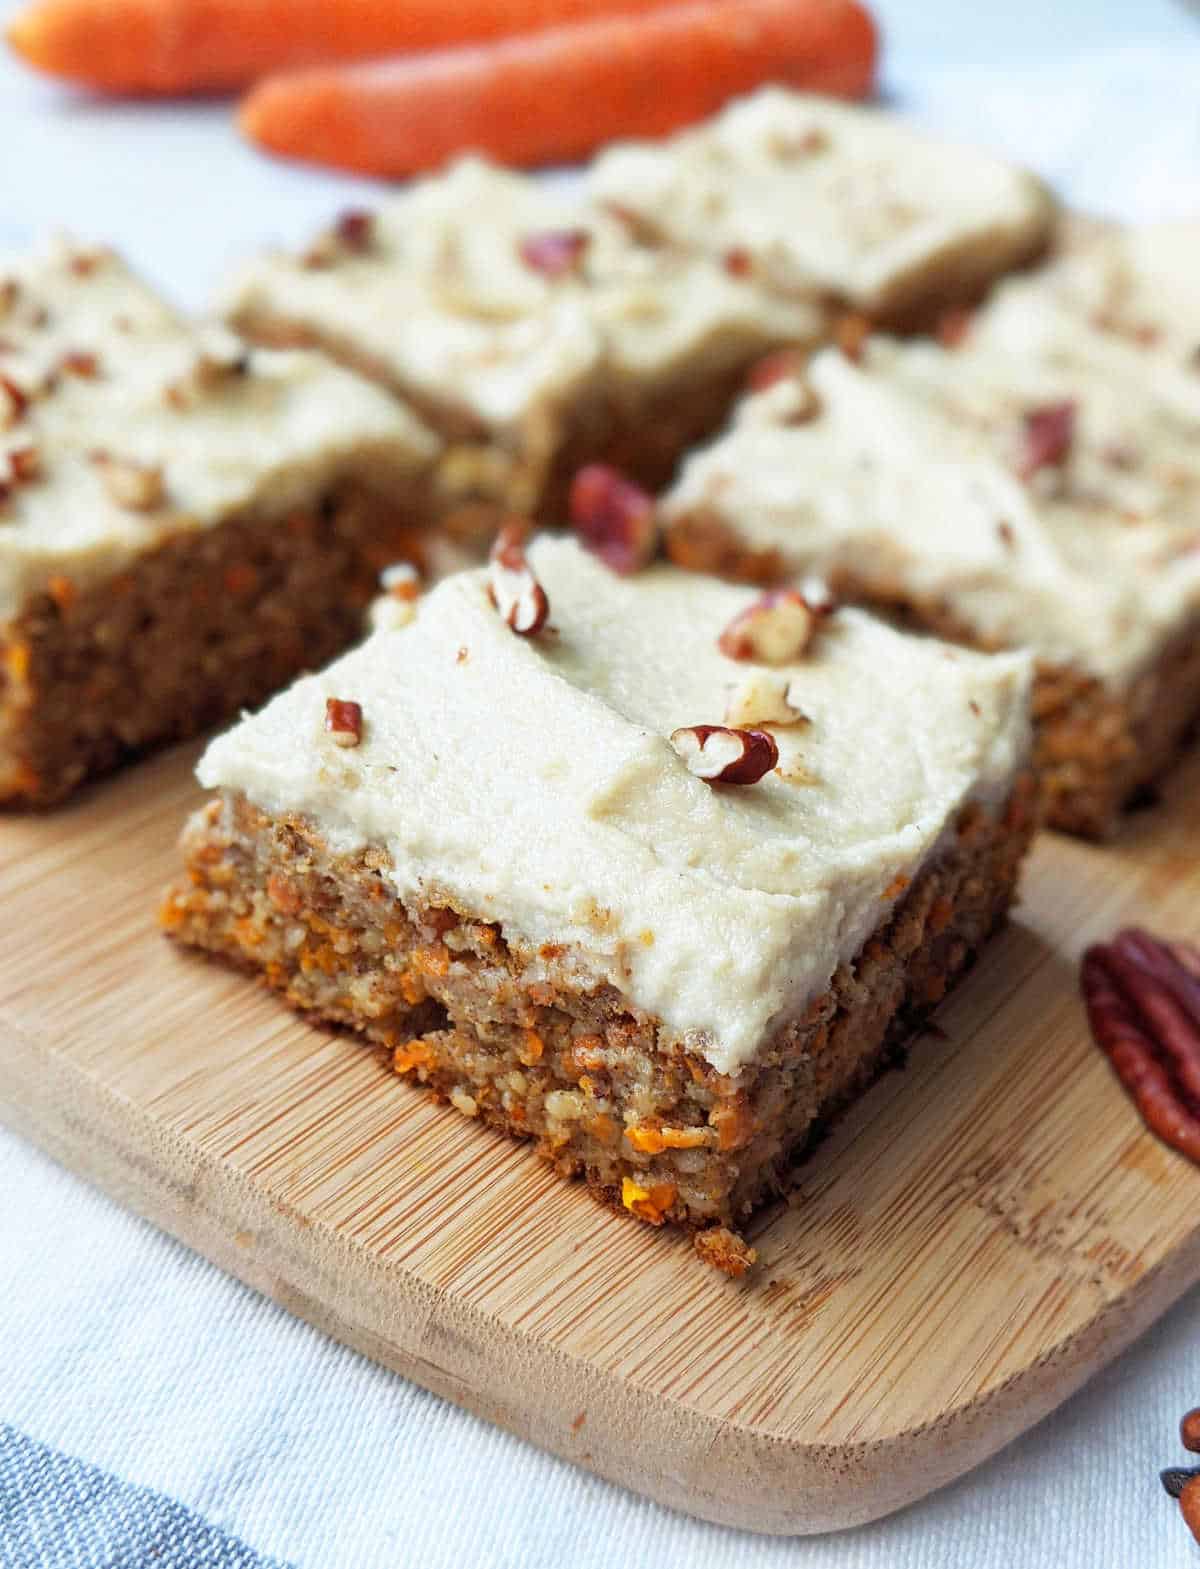 Vegan carrot cake cut into squares with frosting and chopped pecans.